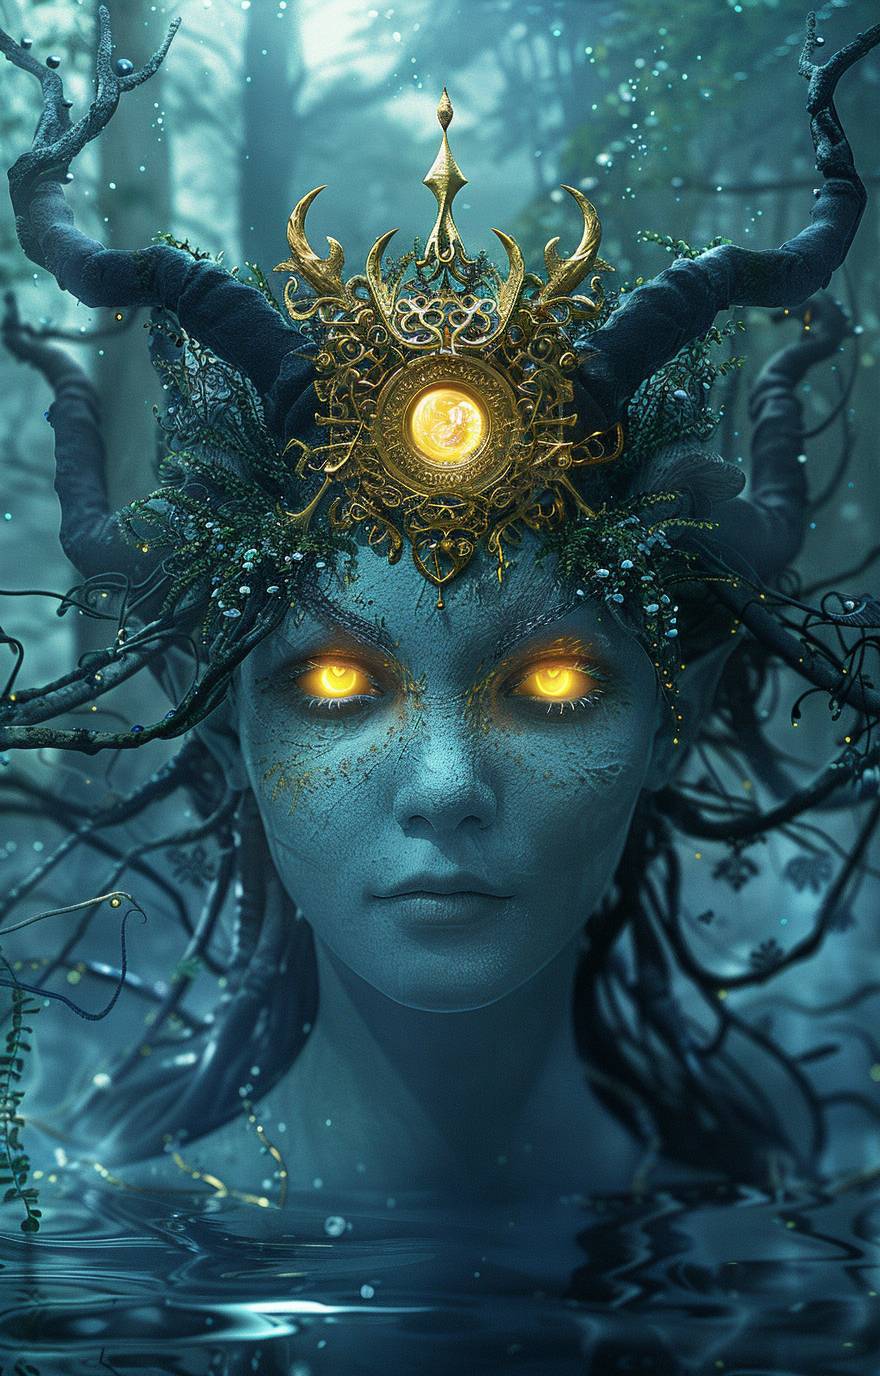 A blue alien woman with glowing yellow eyes and hair made of vines, wearing an elaborate gold crown that is shaped like the sun in front of her head. She has two small black horns on top of each side of her forehead, standing under water with trees visible behind her, in the digital art style.